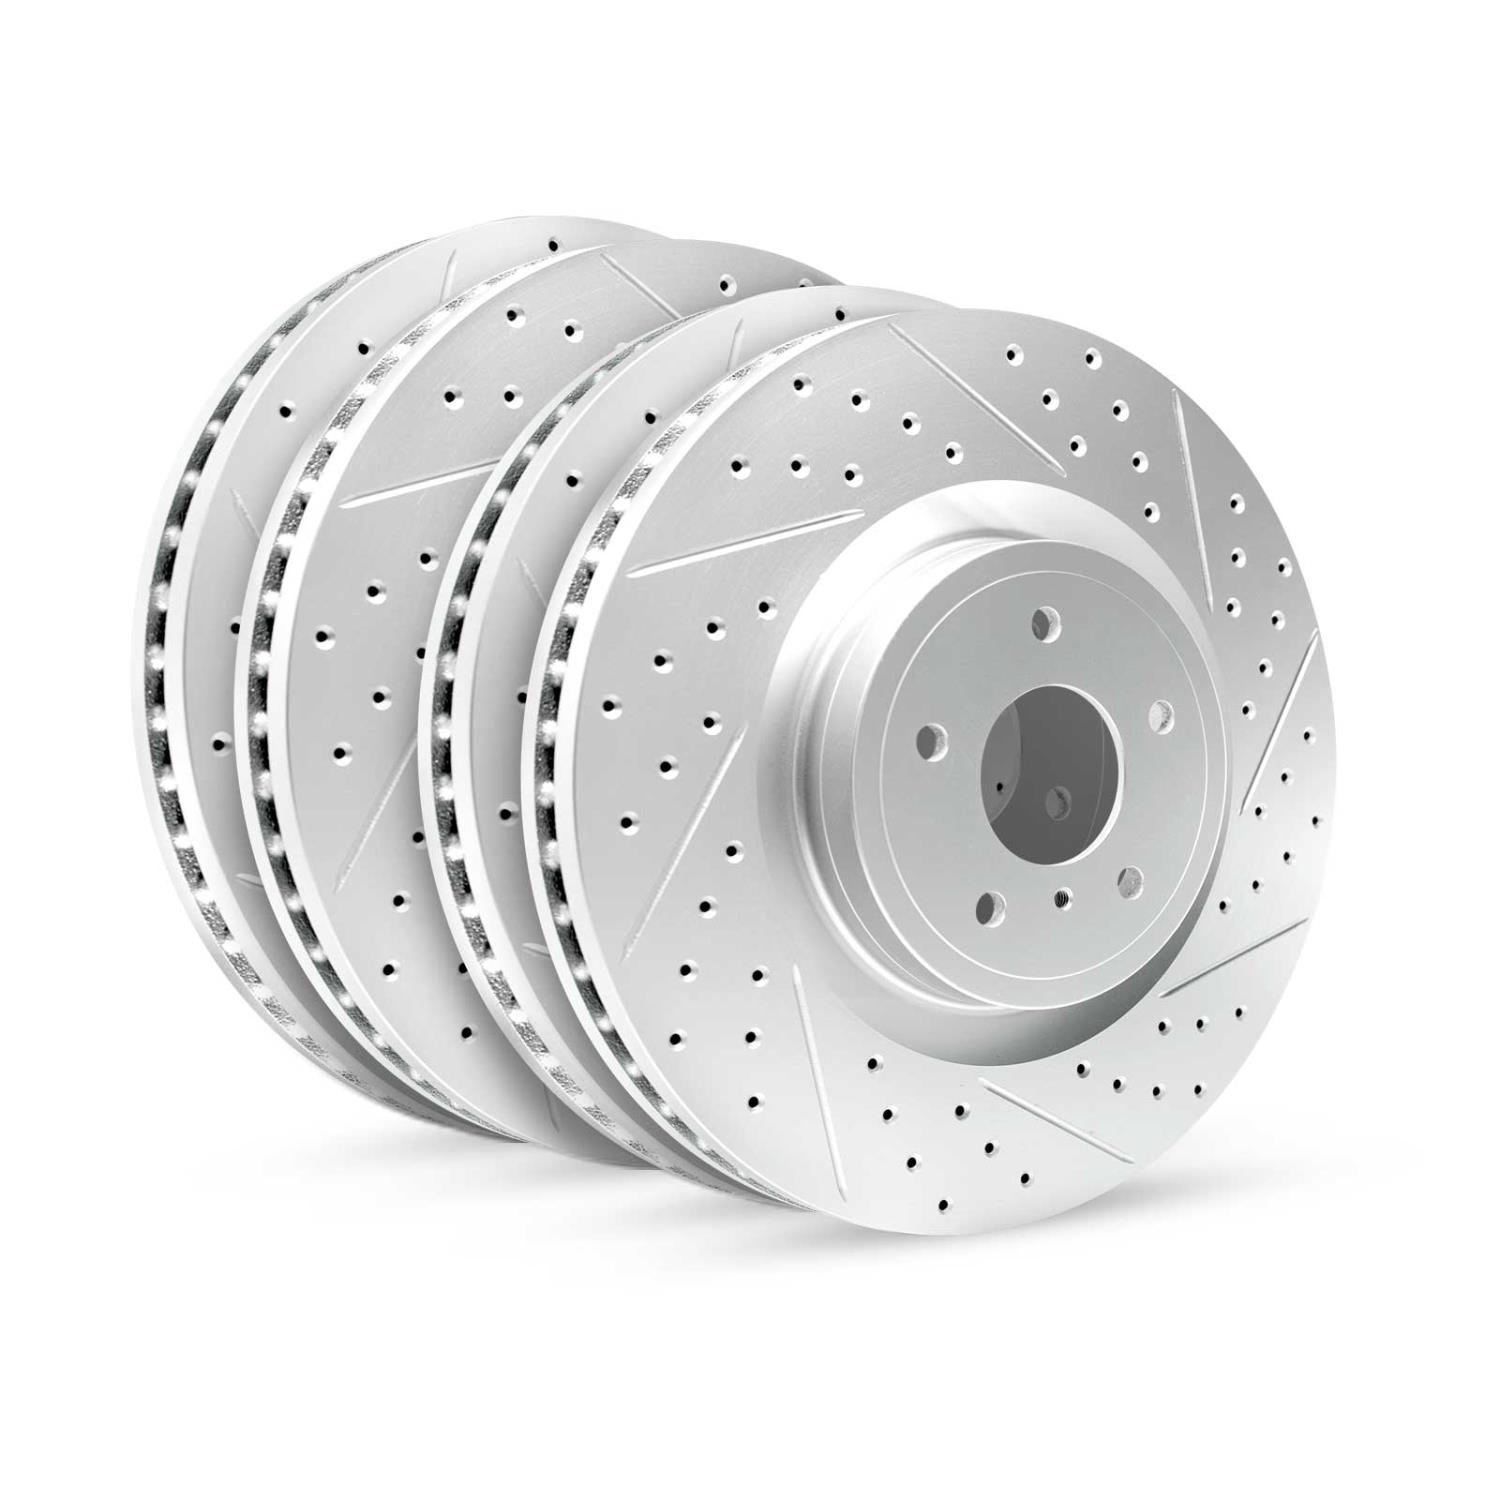 GEO-Carbon Drilled/Slotted Rotors, 2003-2006 Mitsubishi, Position: Front/Rear